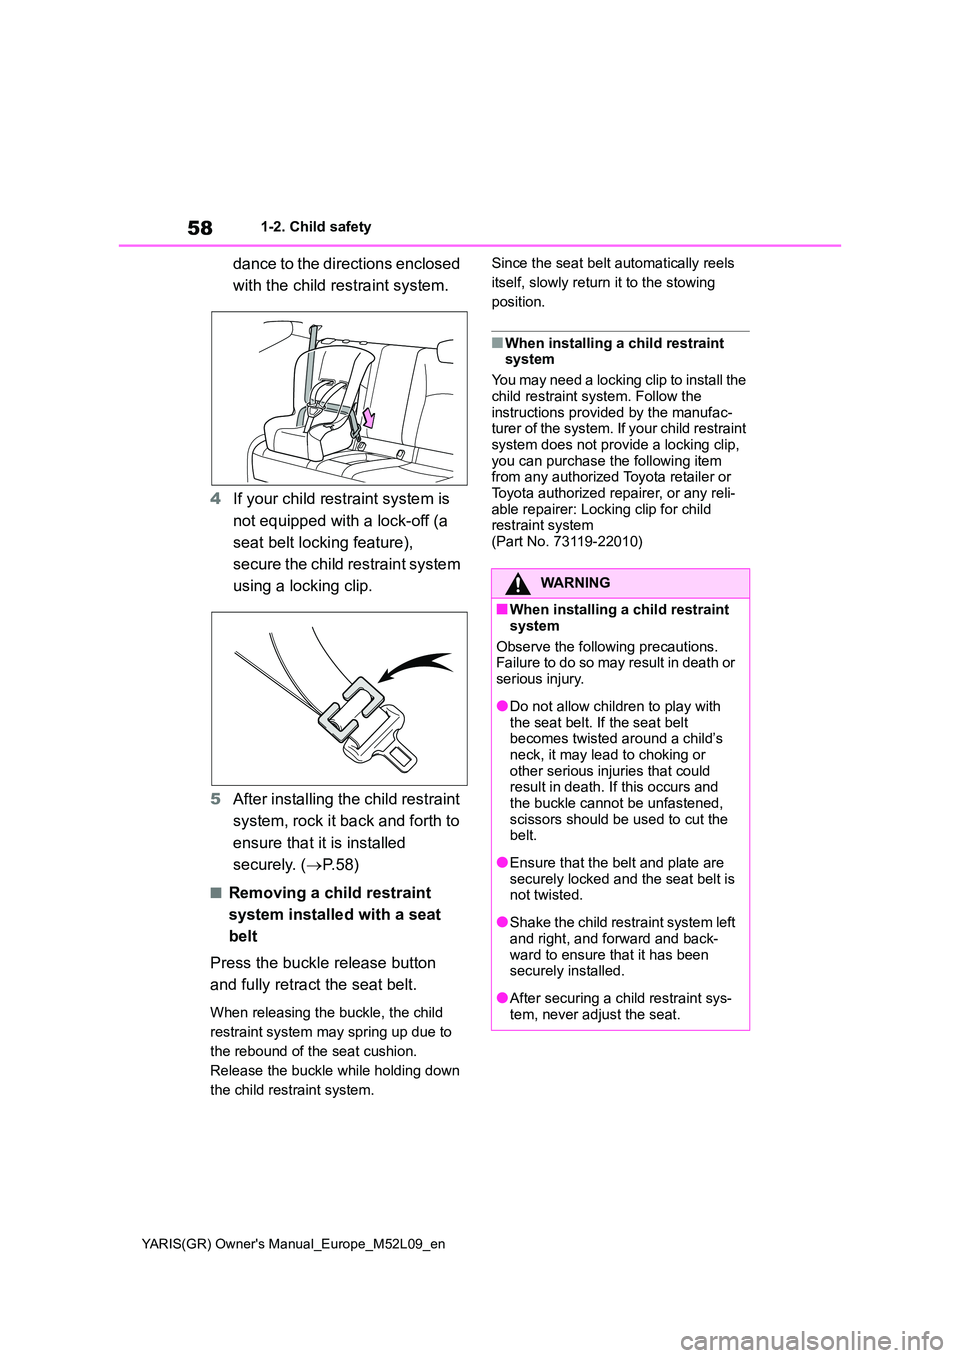 TOYOTA GR YARIS 2020  Owners Manual 58
YARIS(GR) Owners Manual_Europe_M52L09_en
1-2. Child safety
dance to the directions enclosed  
with the child restraint system. 
4 If your child restraint system is  
not equipped with a lock-off (